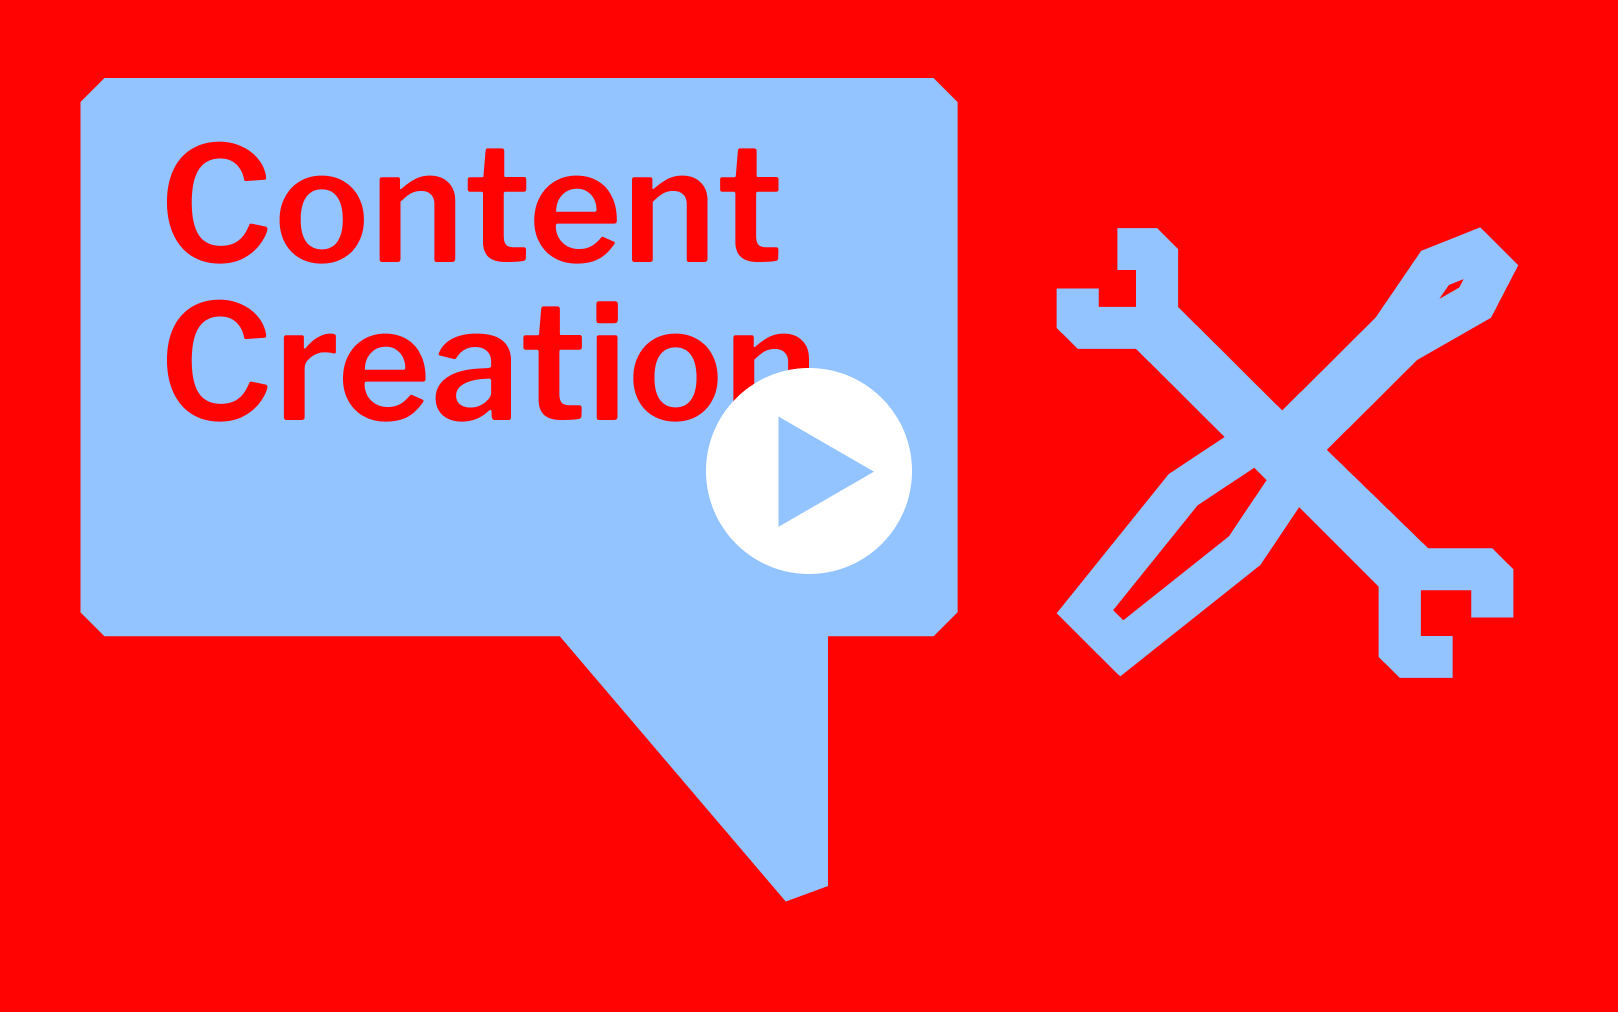 Content creation as service